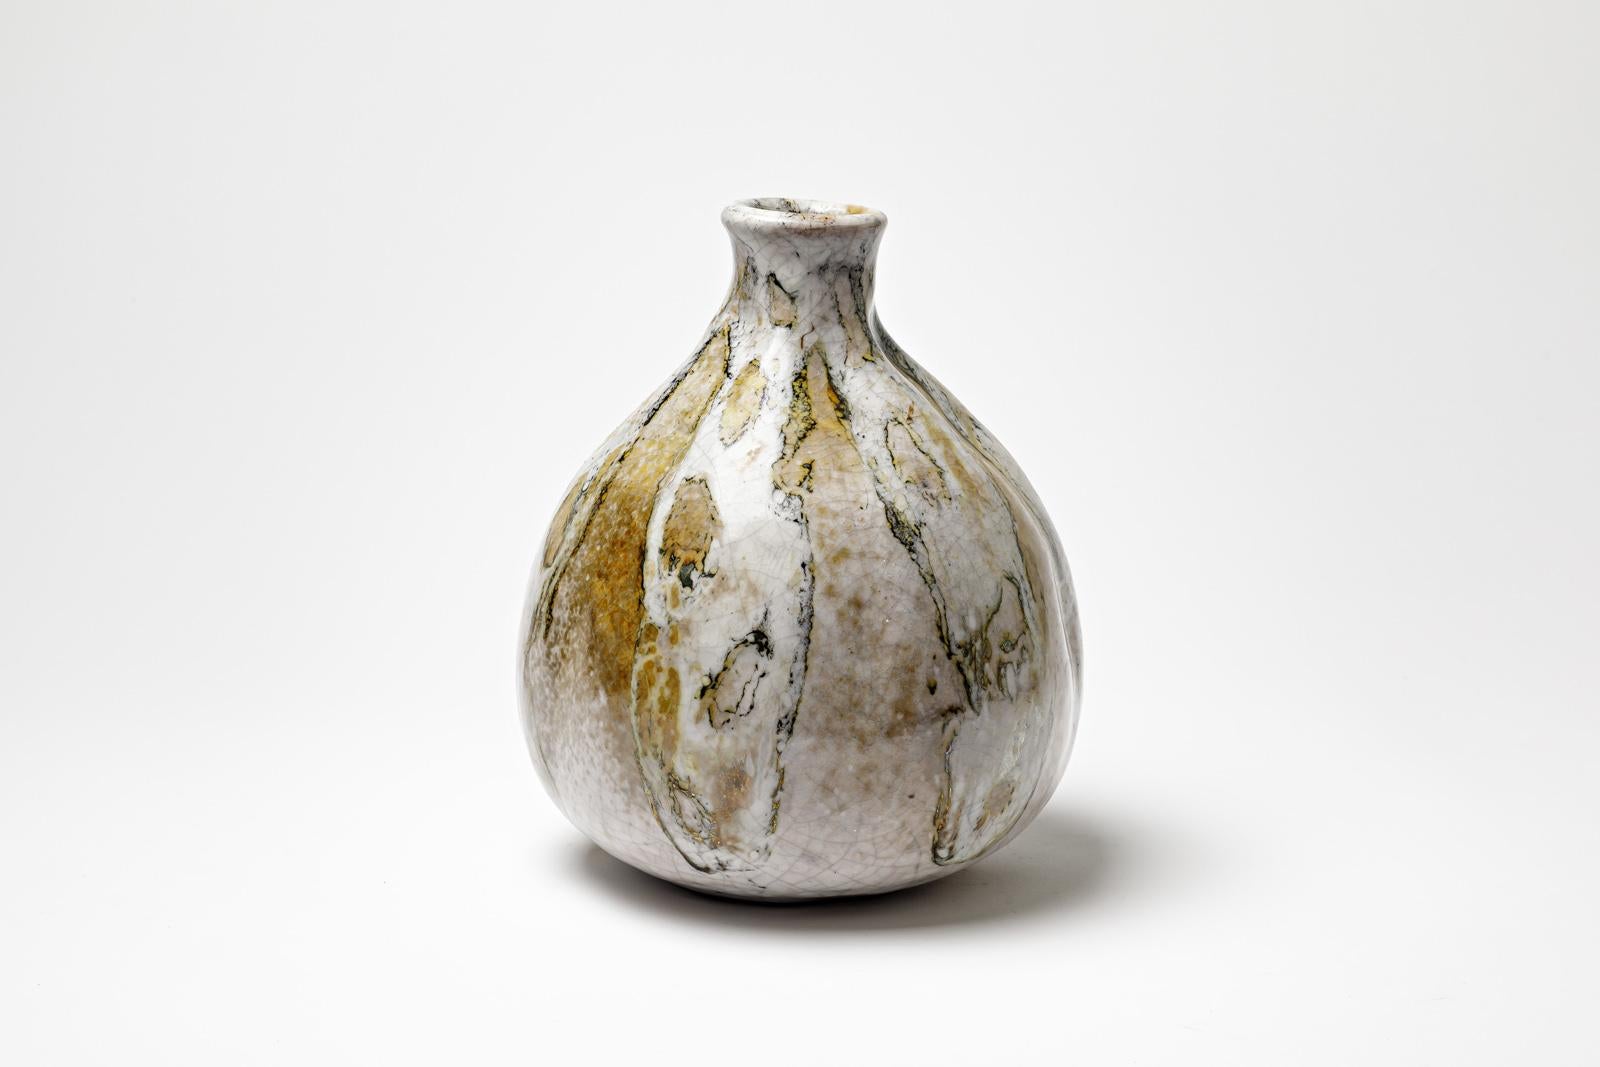 French White and yellow glazed ceramic vase by Gisèle Buthod Garçon, circa 1980-1990 For Sale